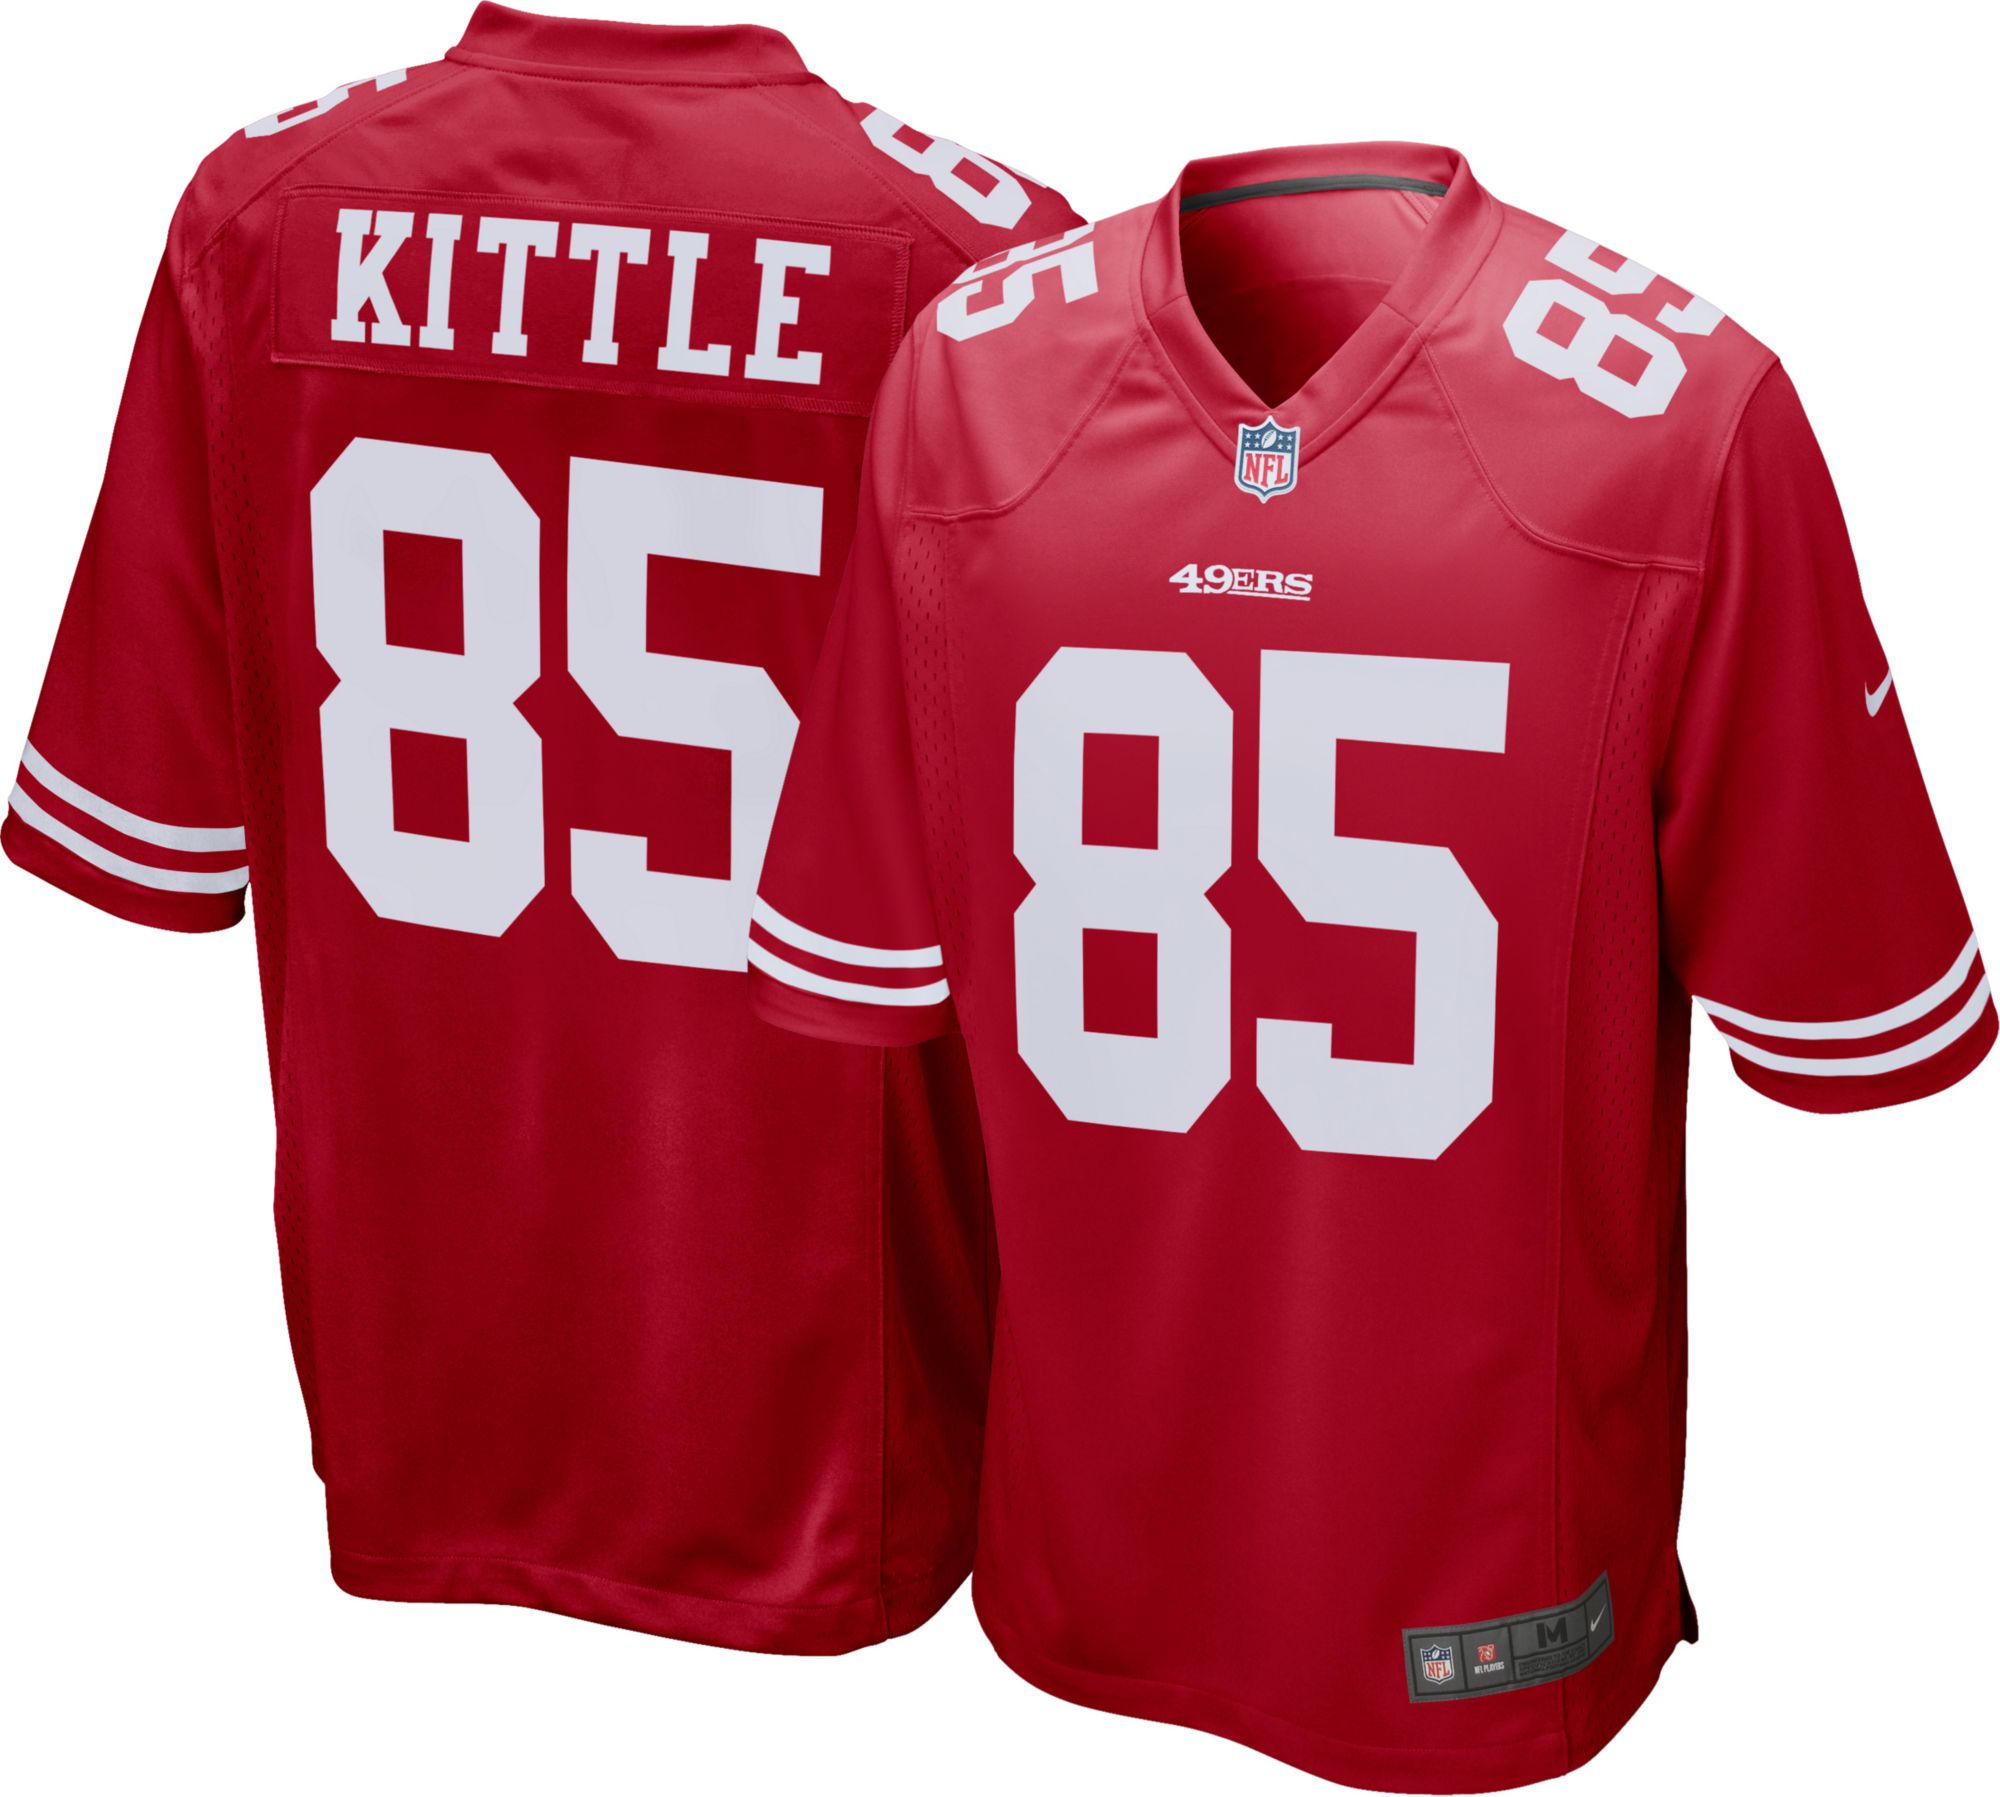 85 jersey 49ers